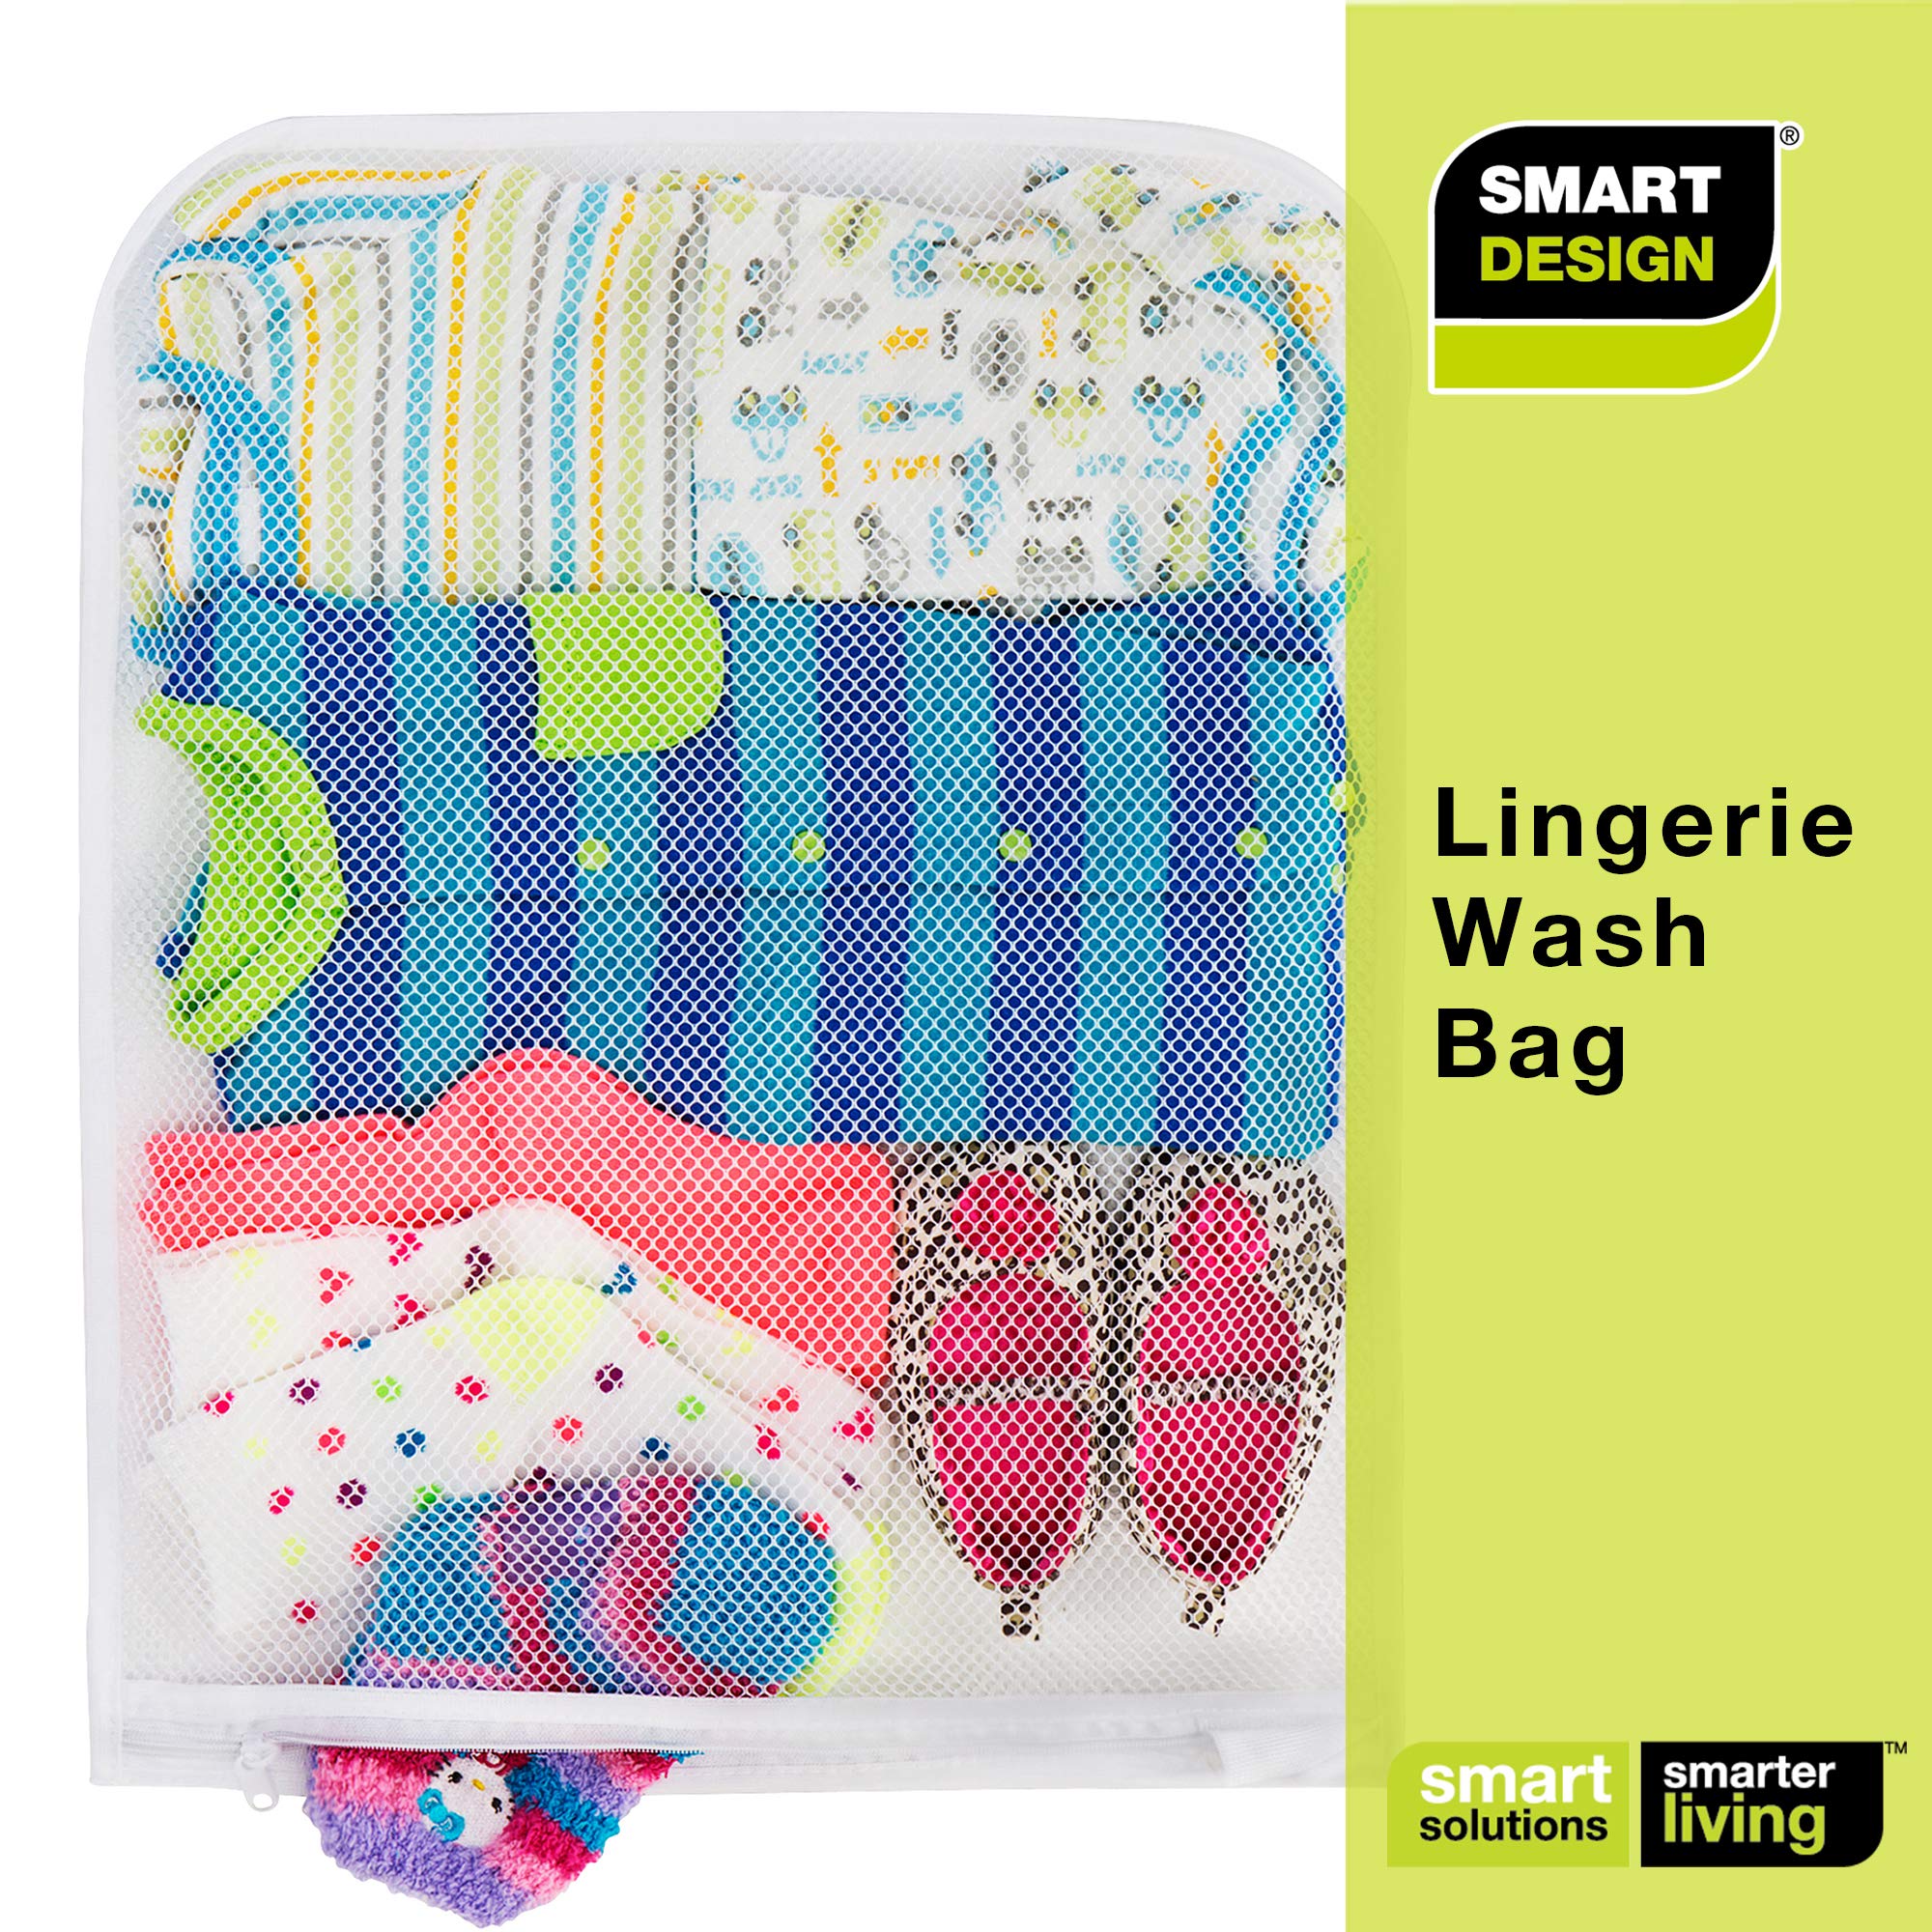 Intimate Wash Bag with Safety Zipper - Set of 2 - 6.5 x 5.5 Inch